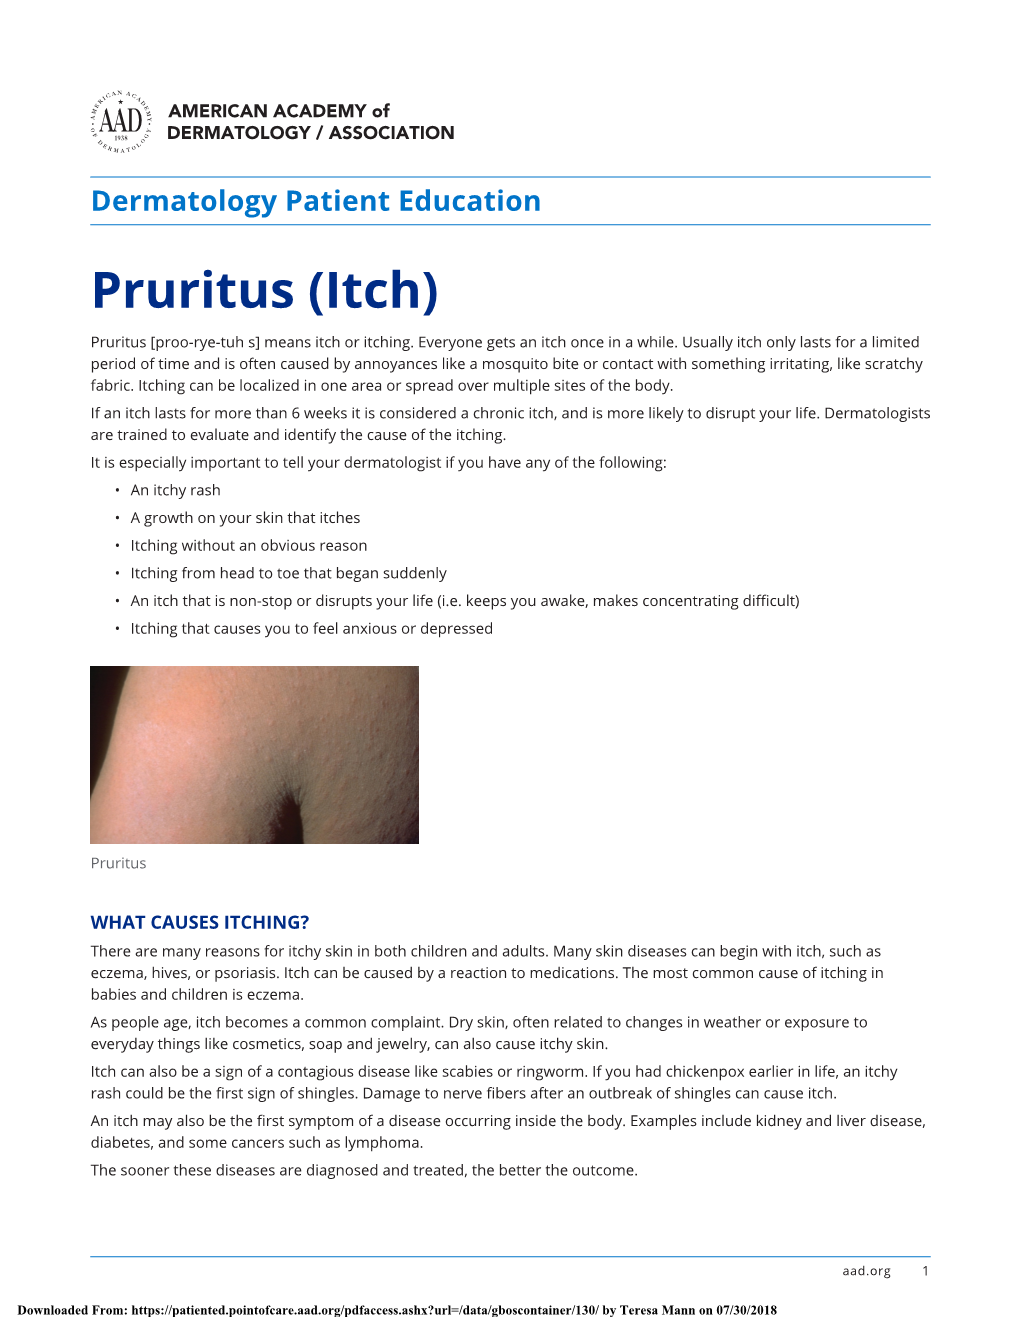 Pruritus (Itch) Pruritus [Proo-Rye-Tuh S] Means Itch Or Itching